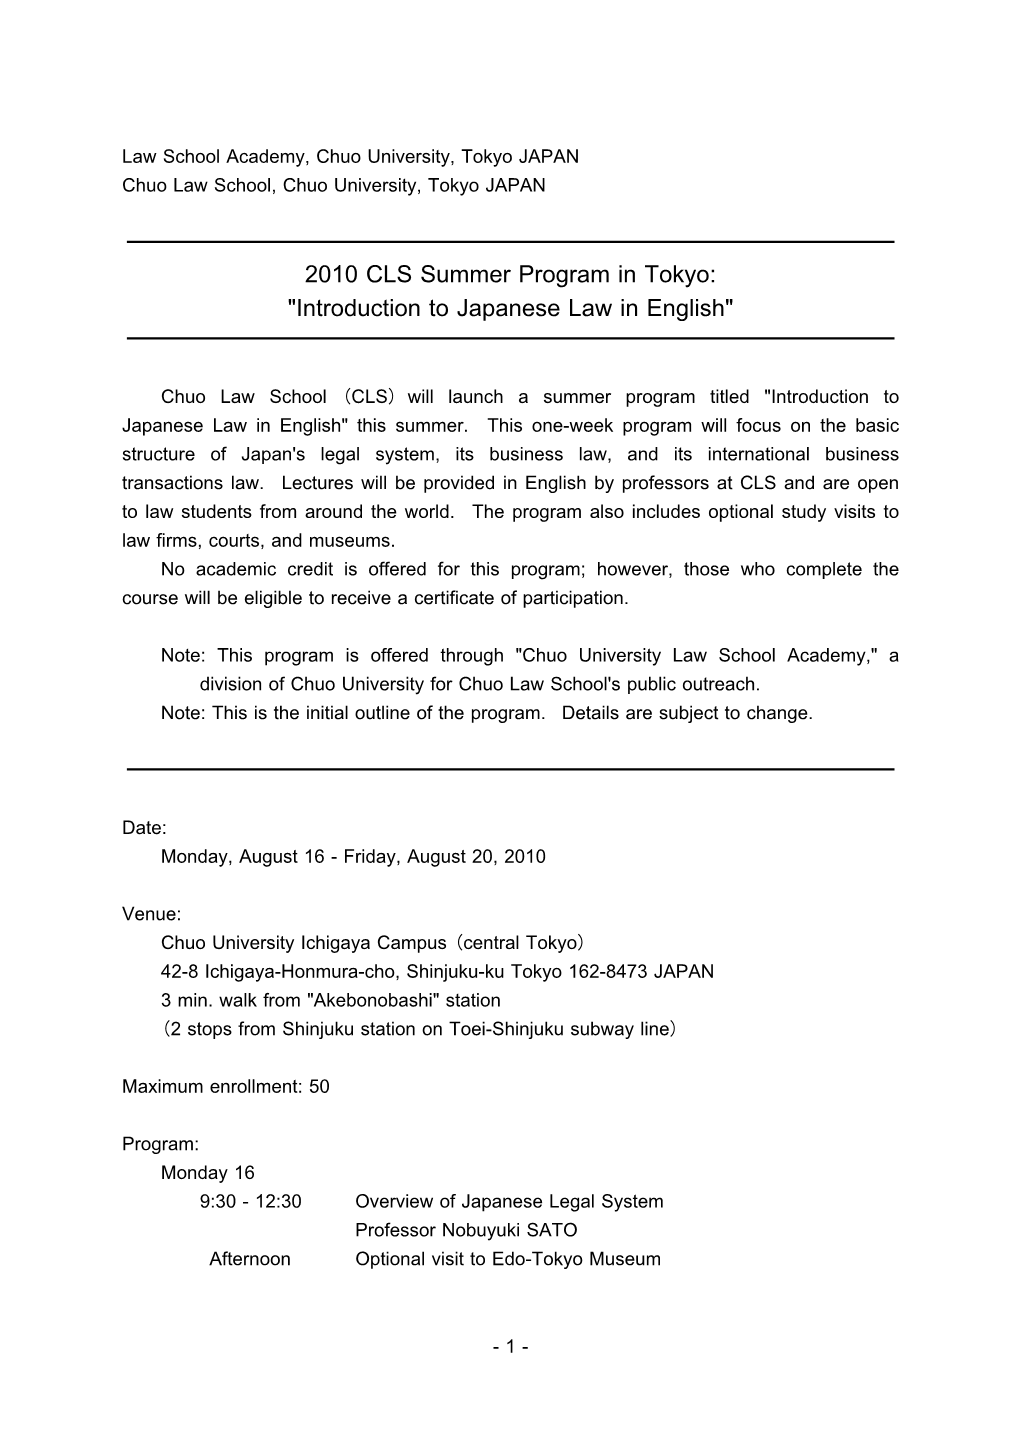 2010 CLS Summer Program in Tokyo: "Introduction to Japanese Law in English"